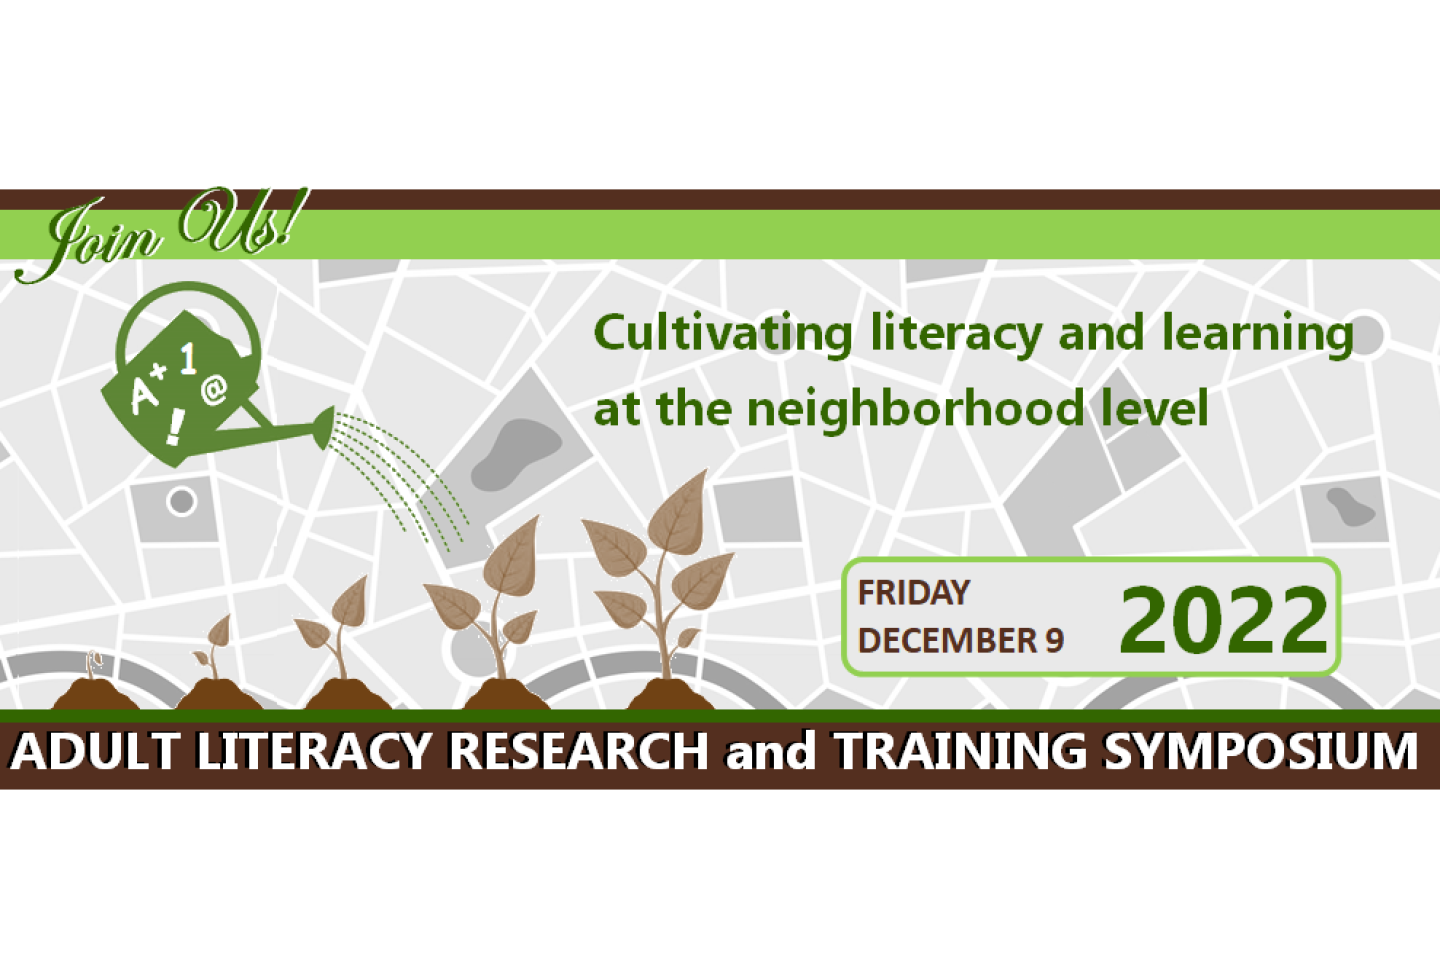 Cultivating literacy and learning at the neighborhood level, Adult Literacy Research and Training Symposium.